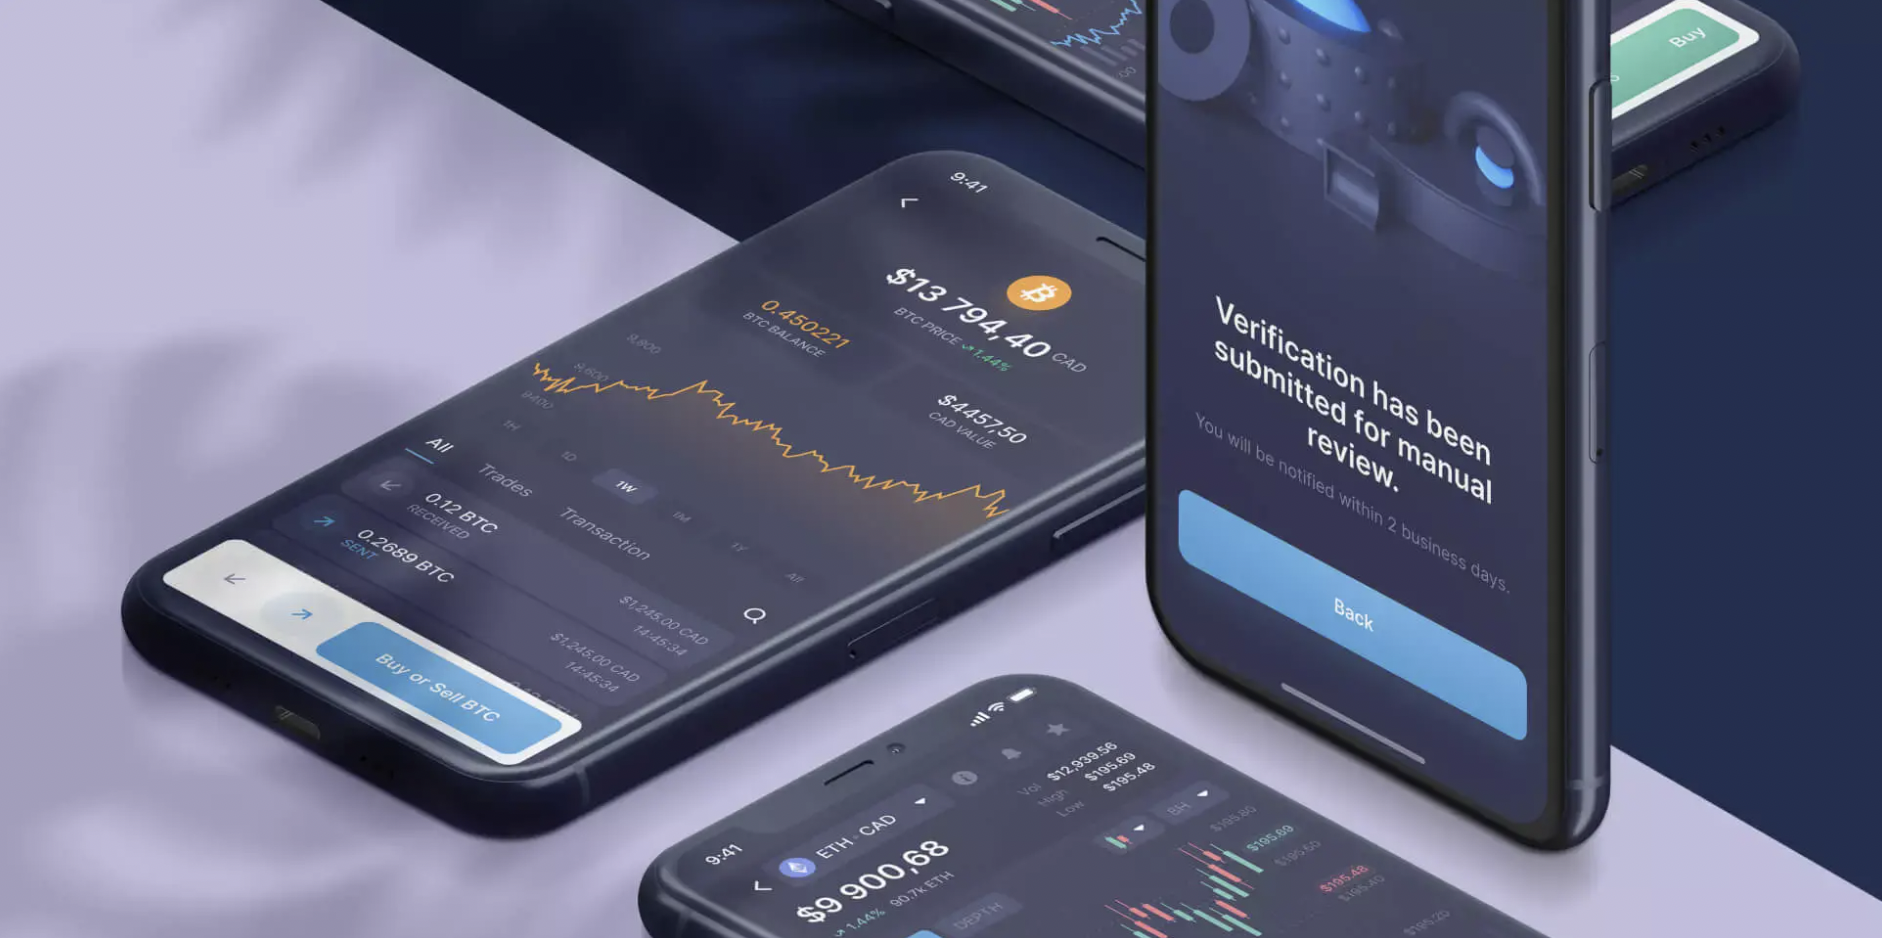 NDAX.io, a cryptocurrency exchange platform developed by WeSoftYou